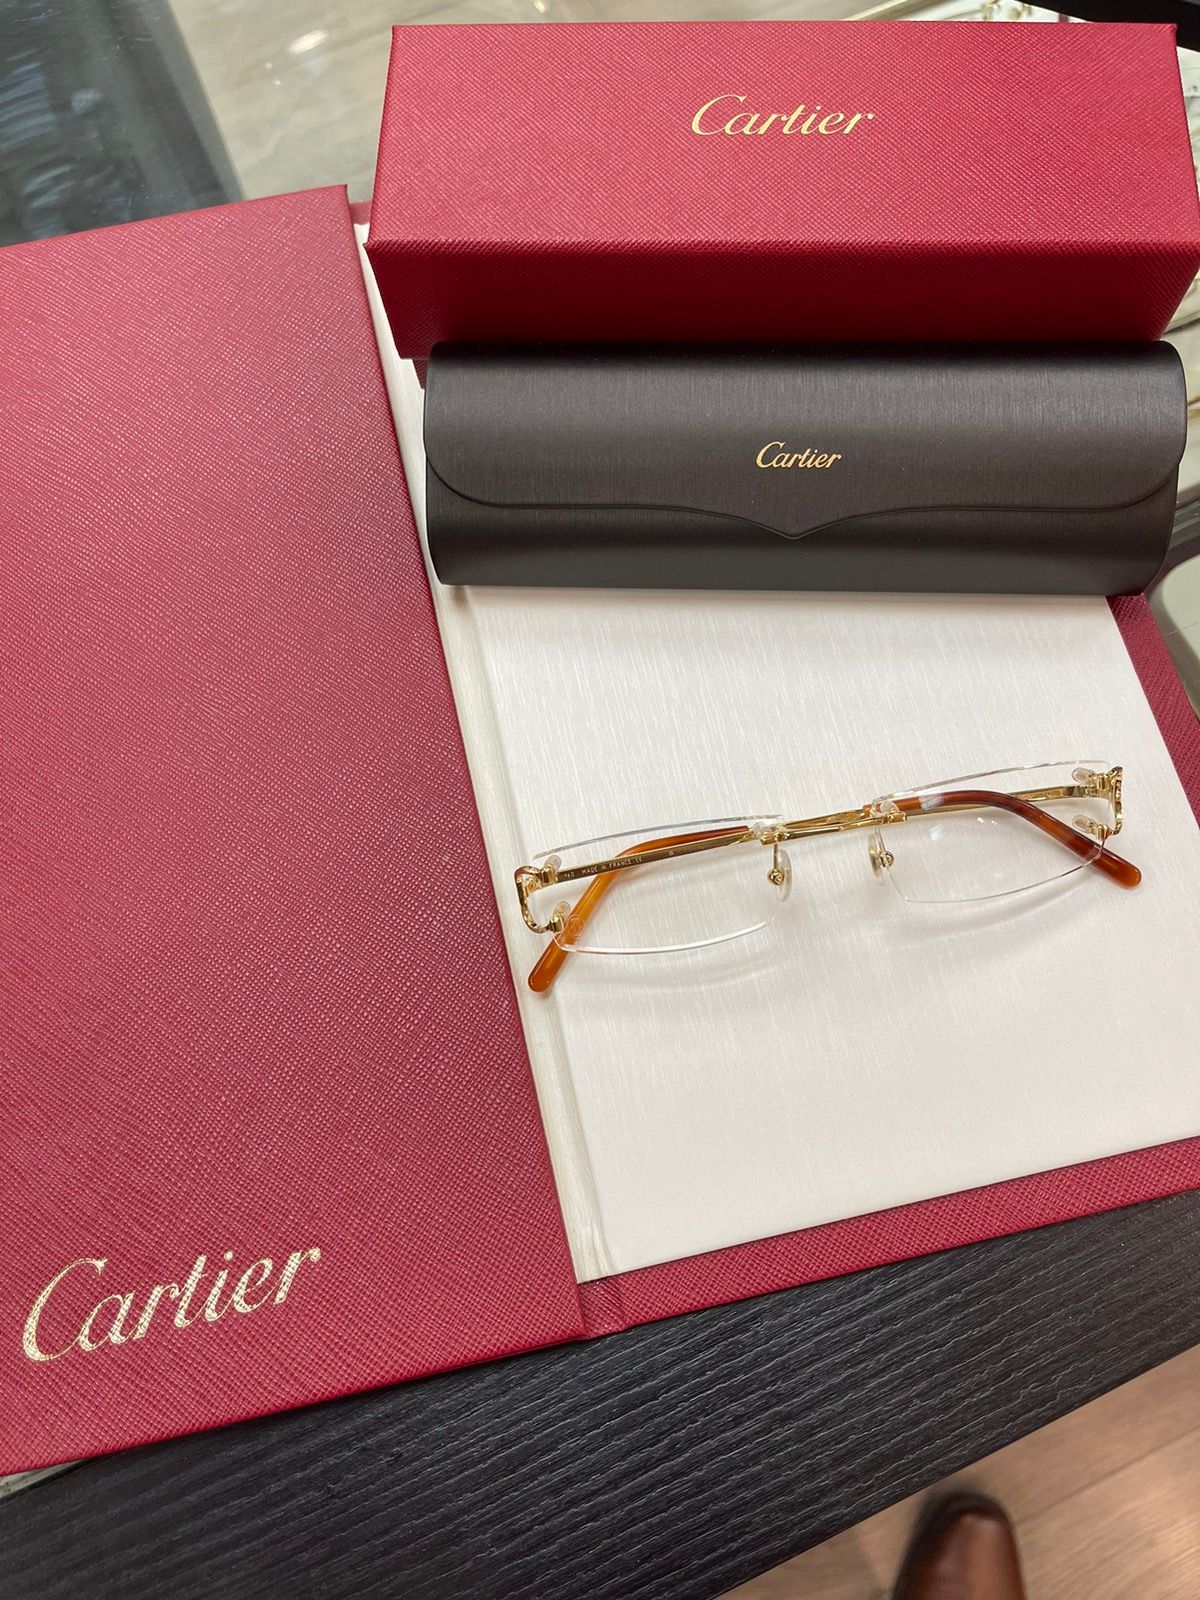 Pre-owned Cartier New  Ct0092 Piccadilly Gold Big C's Eyeglasse